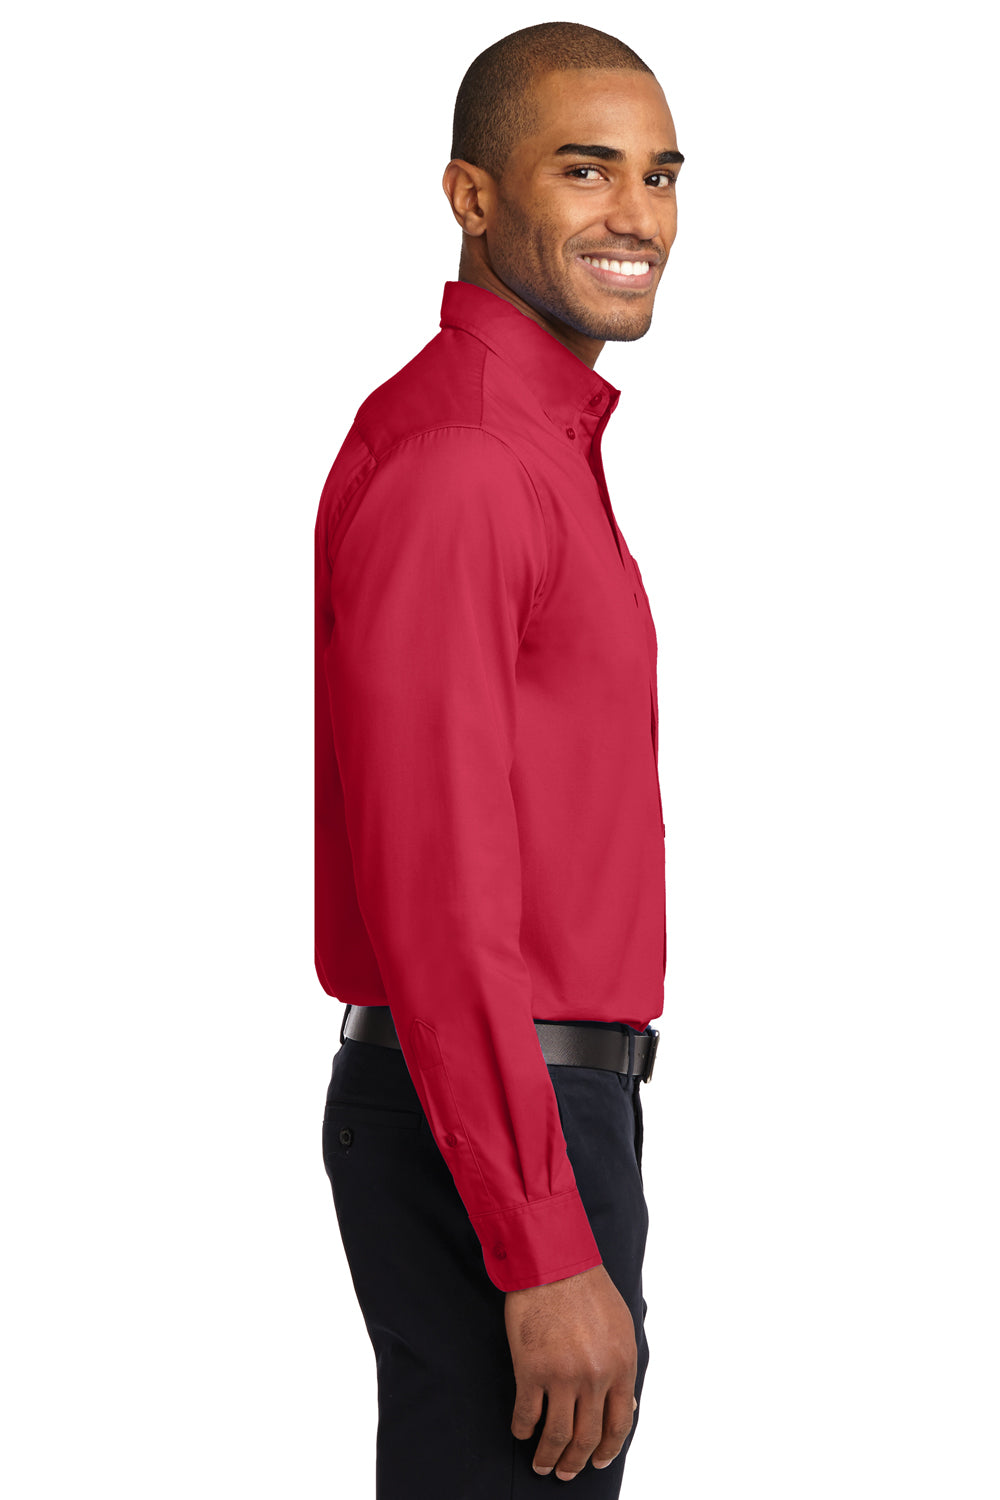 Port Authority S608/TLS608/S608ES Mens Easy Care Wrinkle Resistant Long Sleeve Button Down Shirt w/ Pocket Red Side